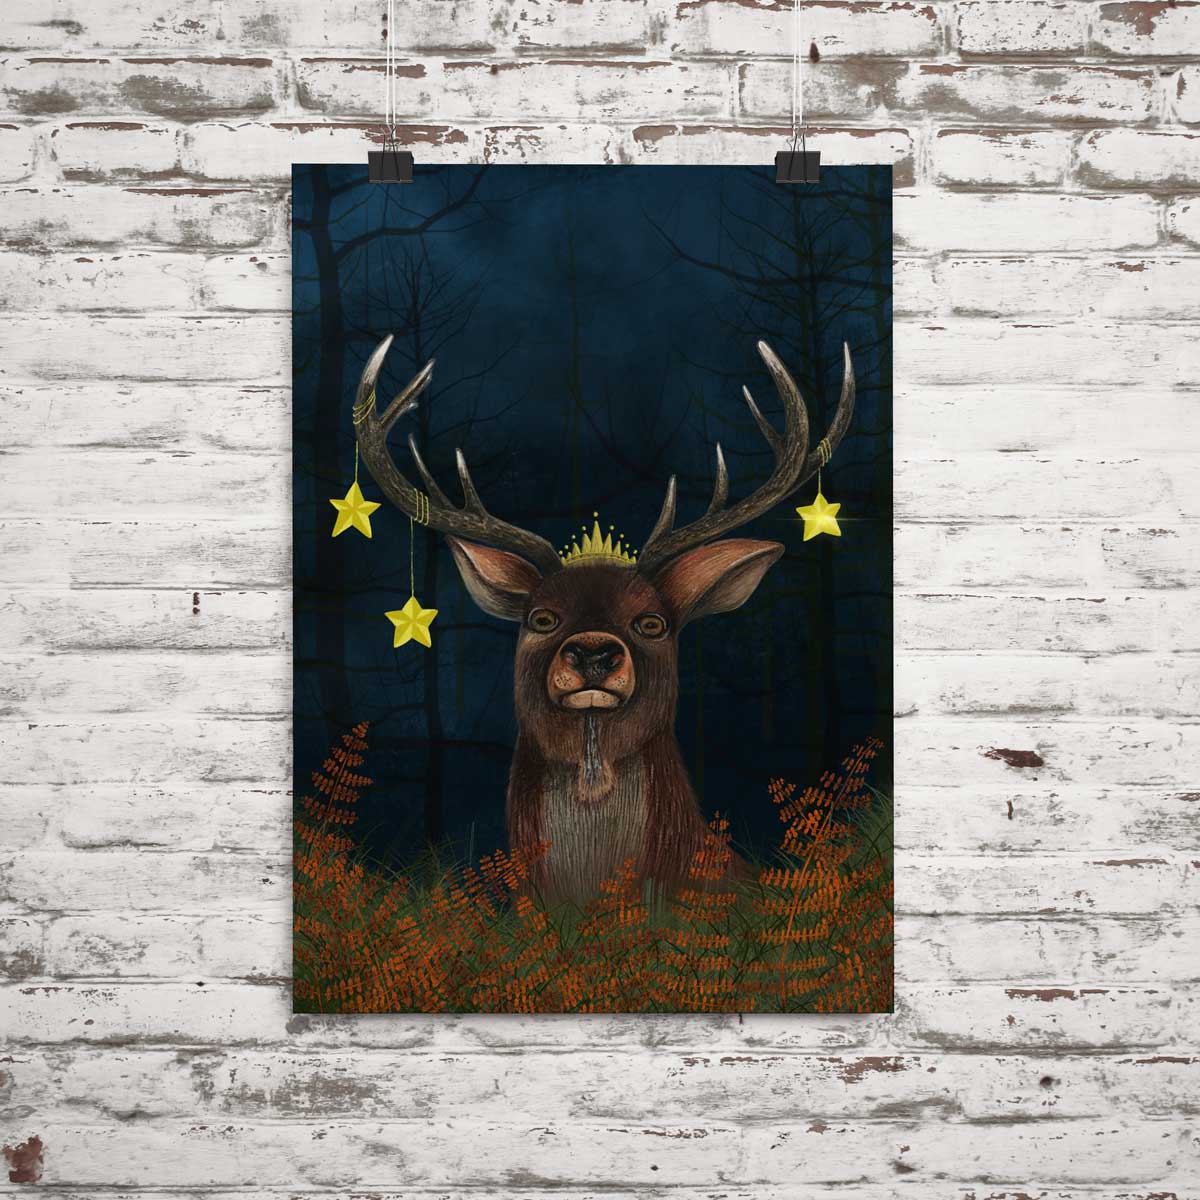 Coloured pencil illustration of a stag wearing a crown with stars hanging from its antlers 